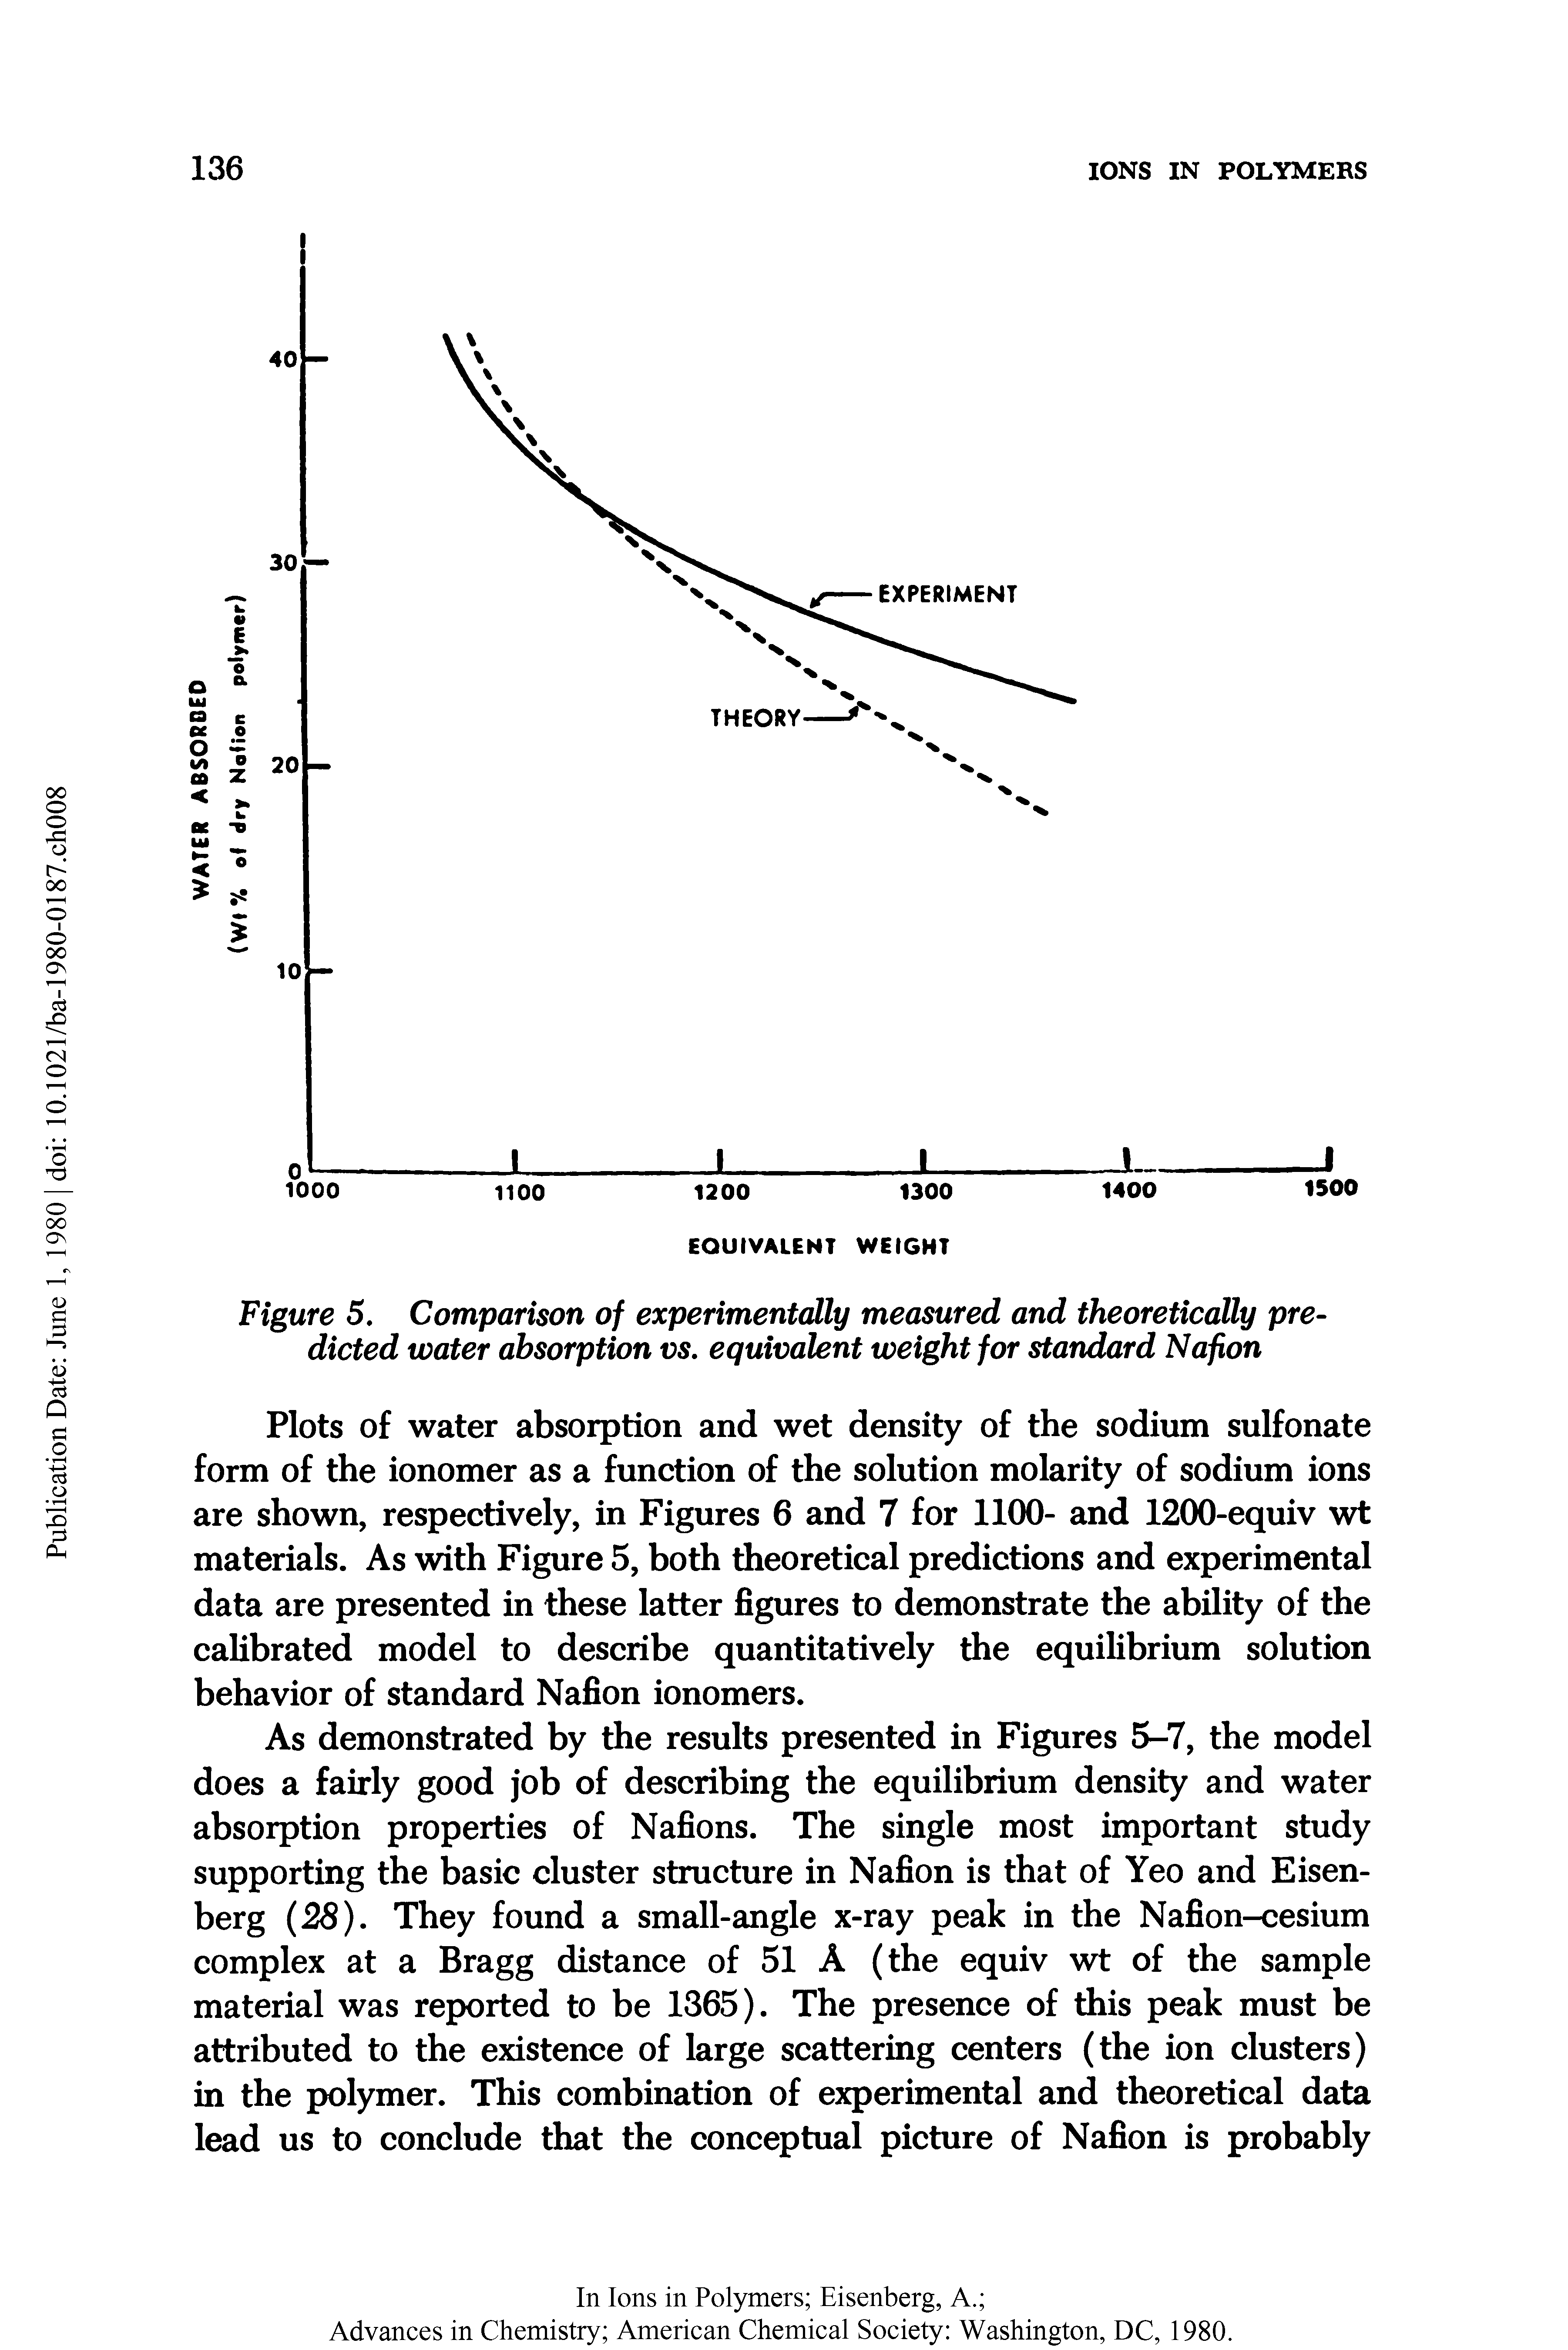 Figure 5. Comparison of experimentally measured and theoretically predicted water absorption vs. equivalent weight for standard Nafion...